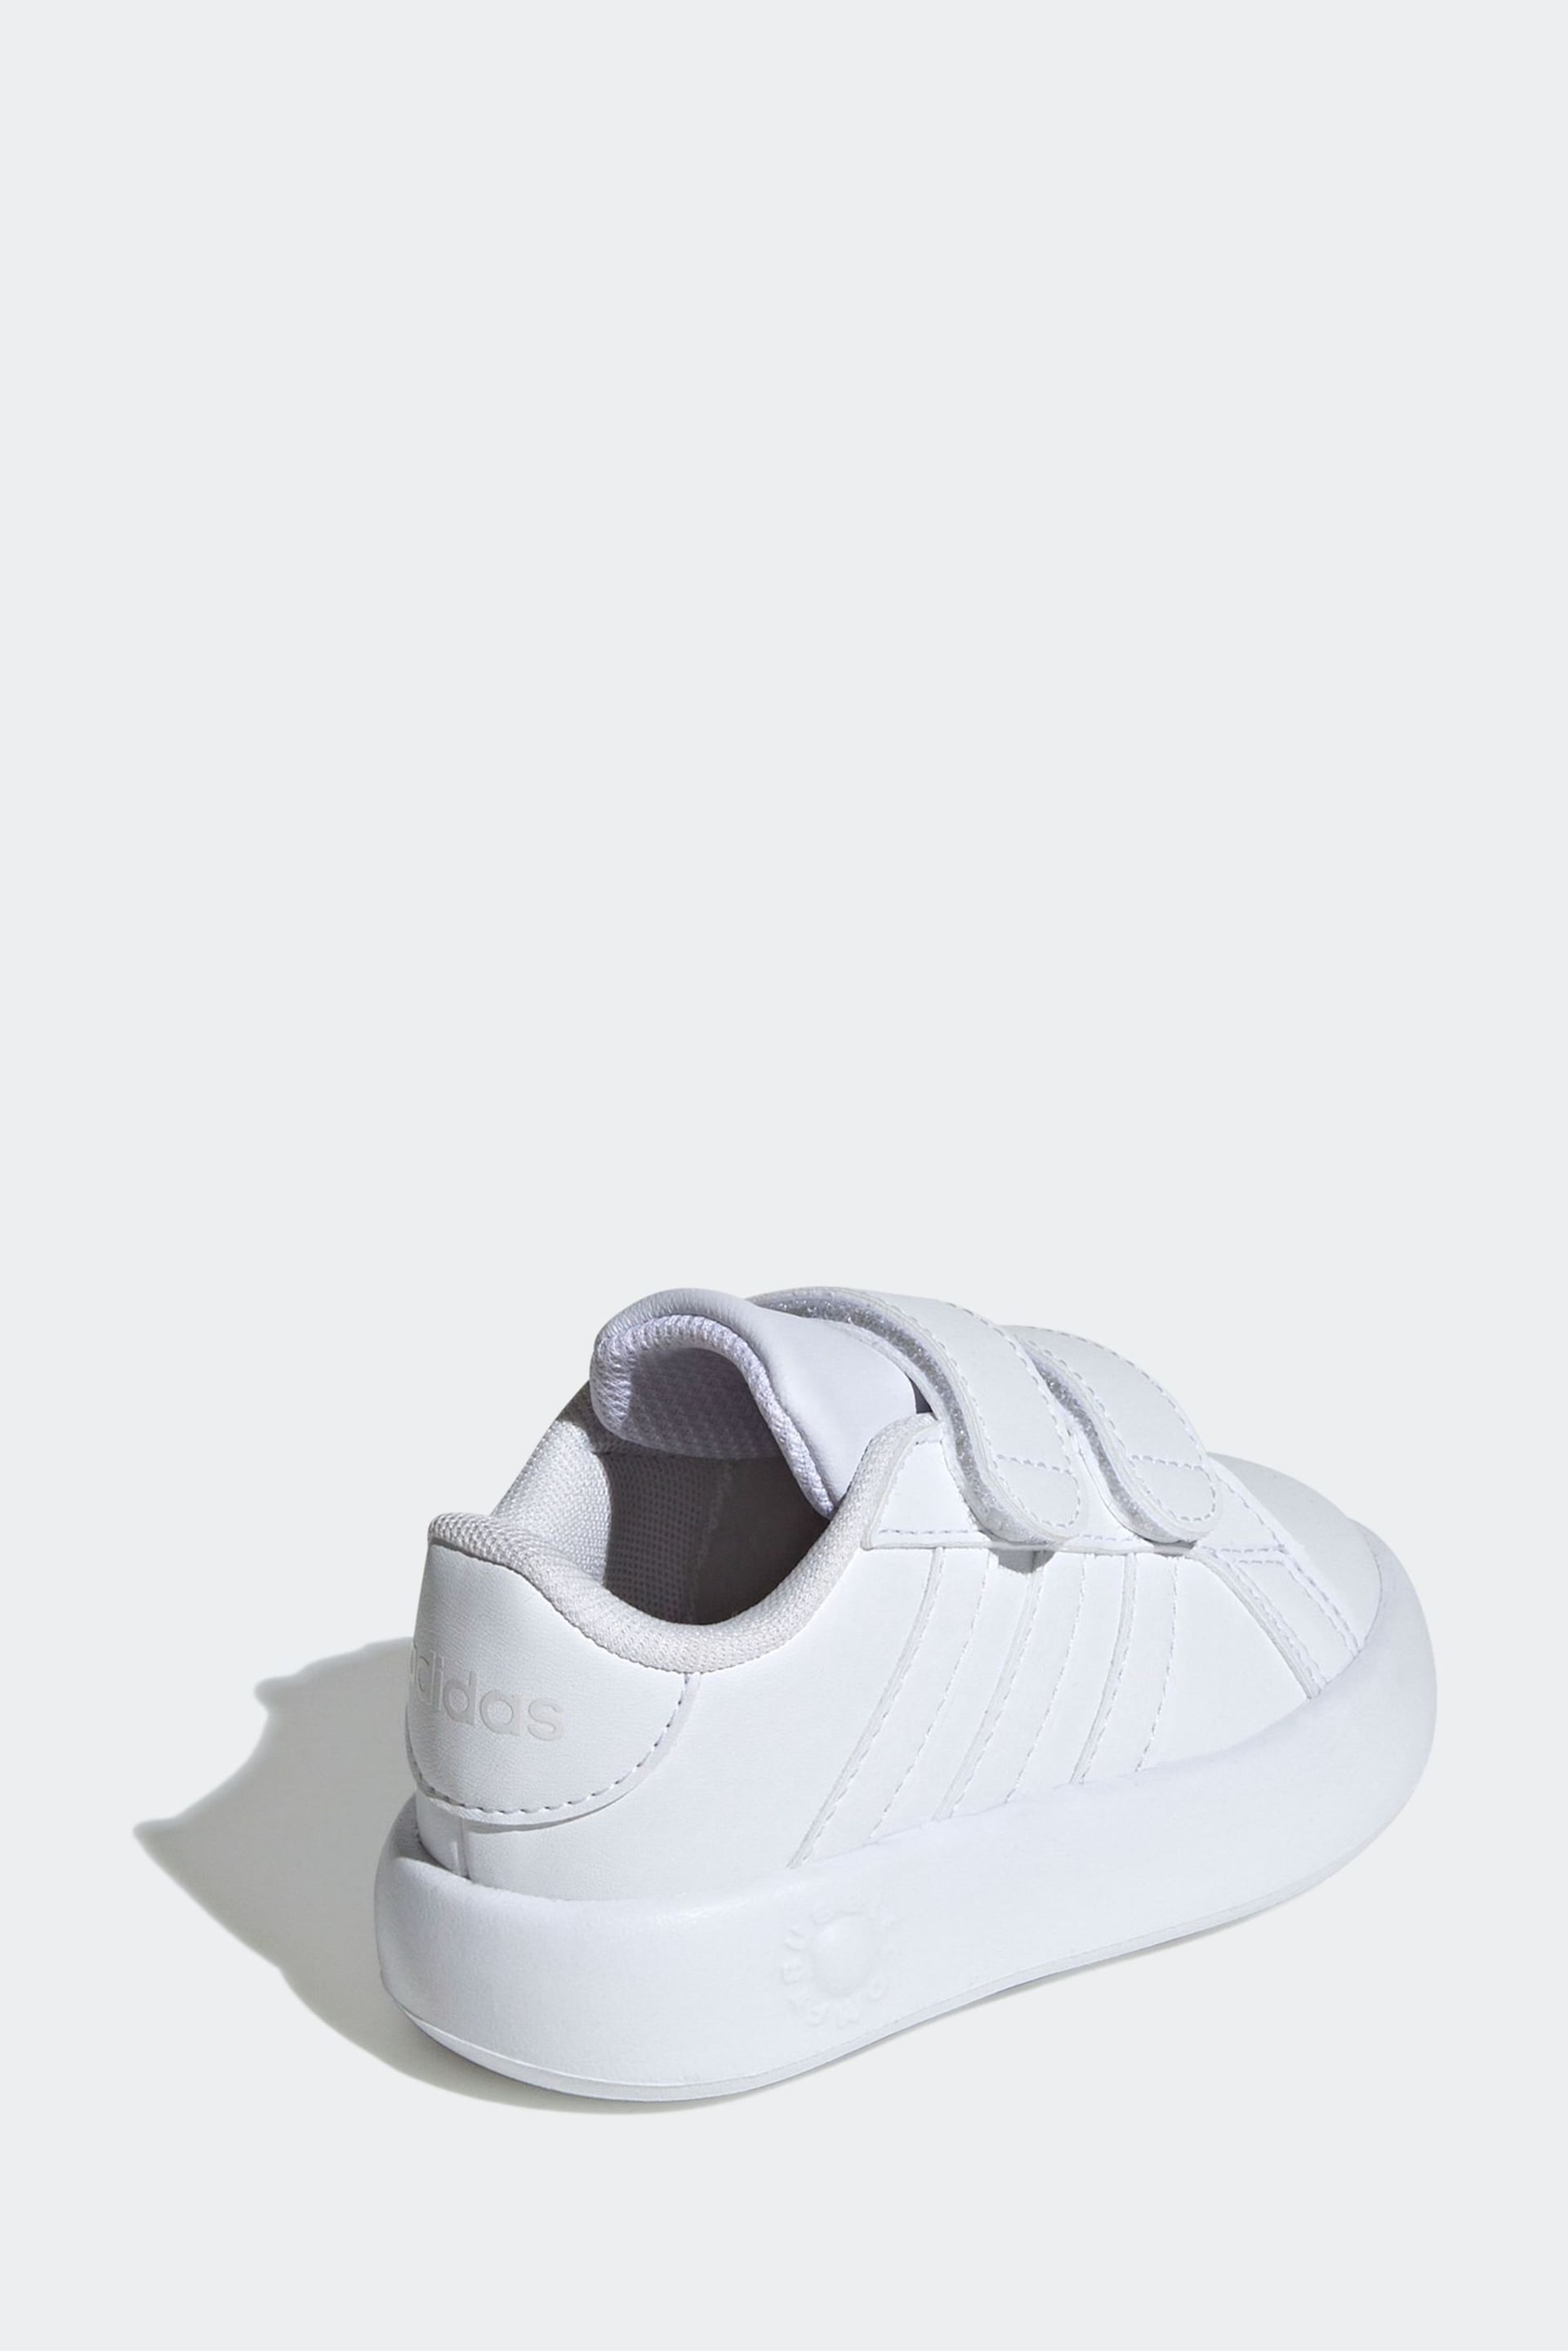 adidas White Kids Grand Court 2.0 Shoes - Image 2 of 8